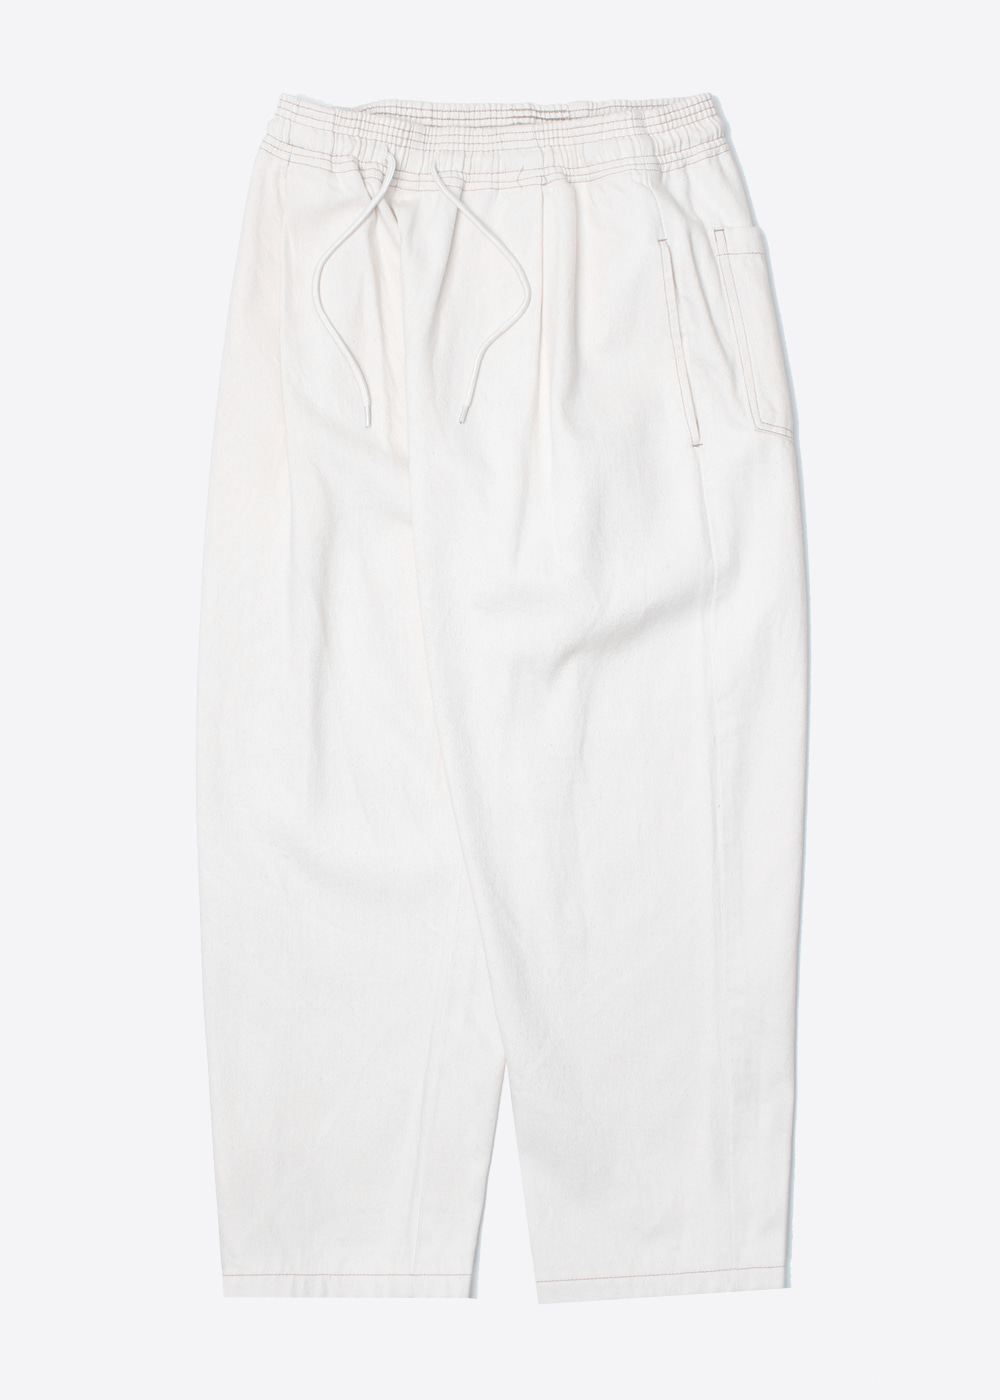 FREAK’S STORE’relax fit’ cotton work pant